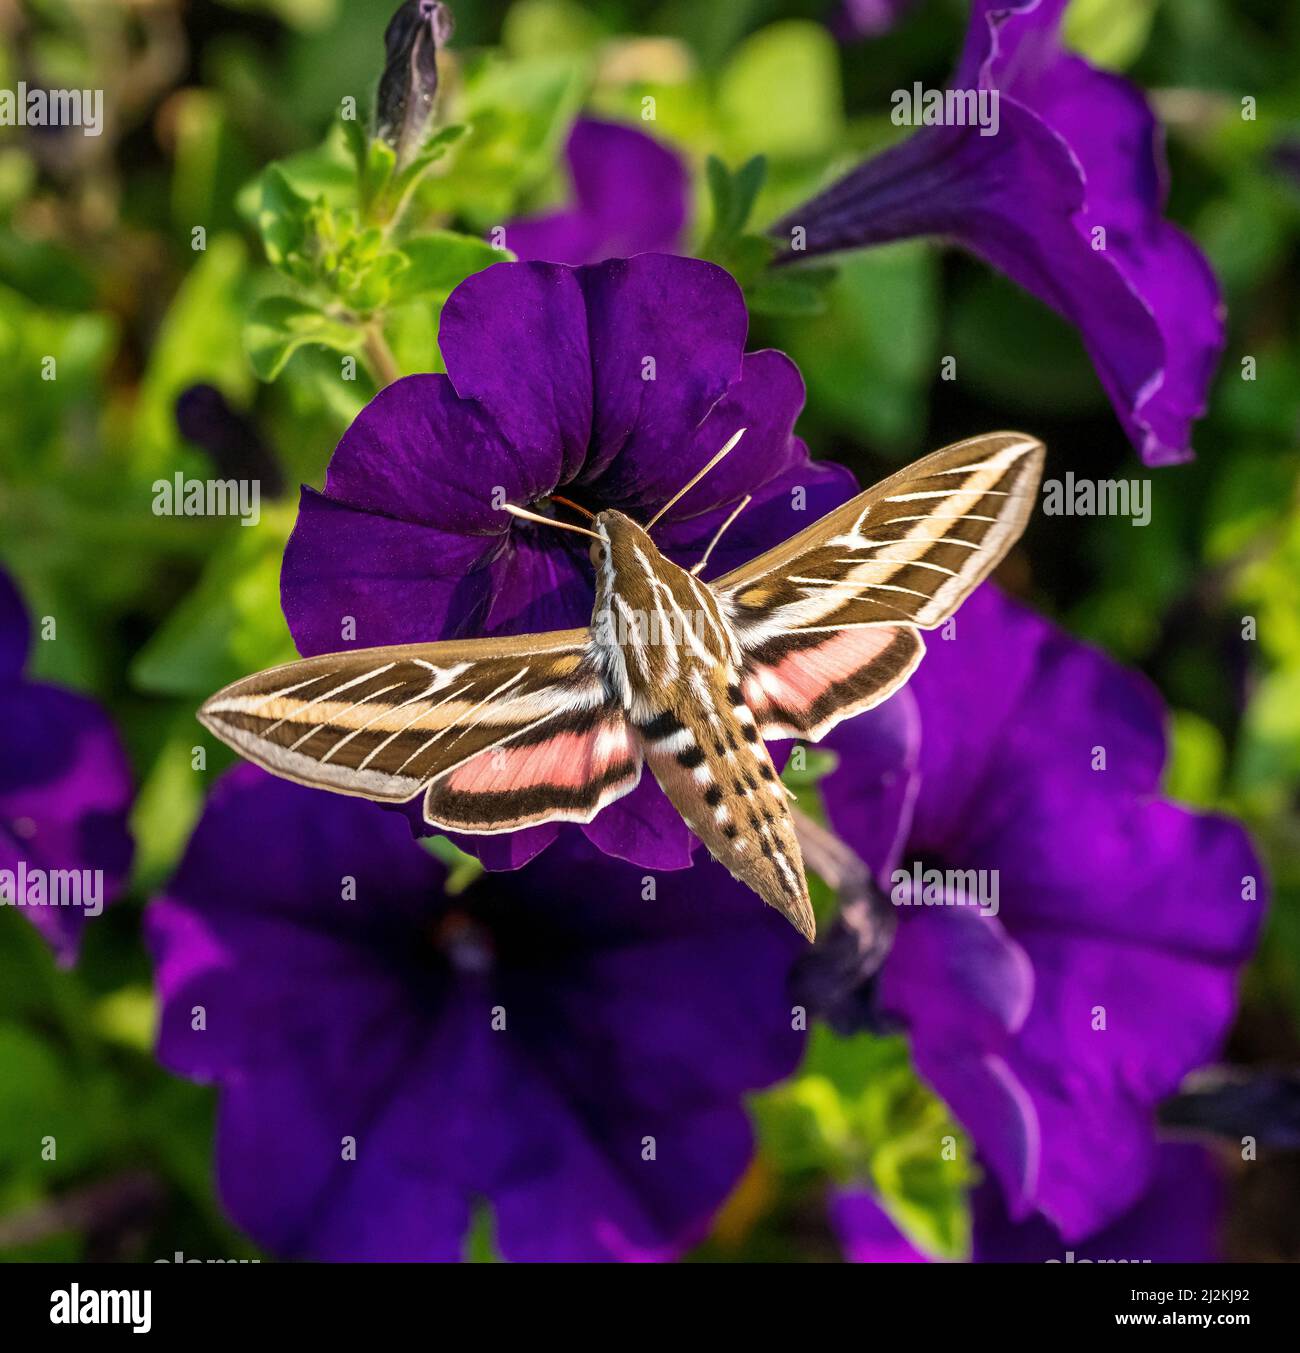 A White-Lined Sphinx Moth (Hyles lineata) pollinating a purple Petunia. Stock Photo